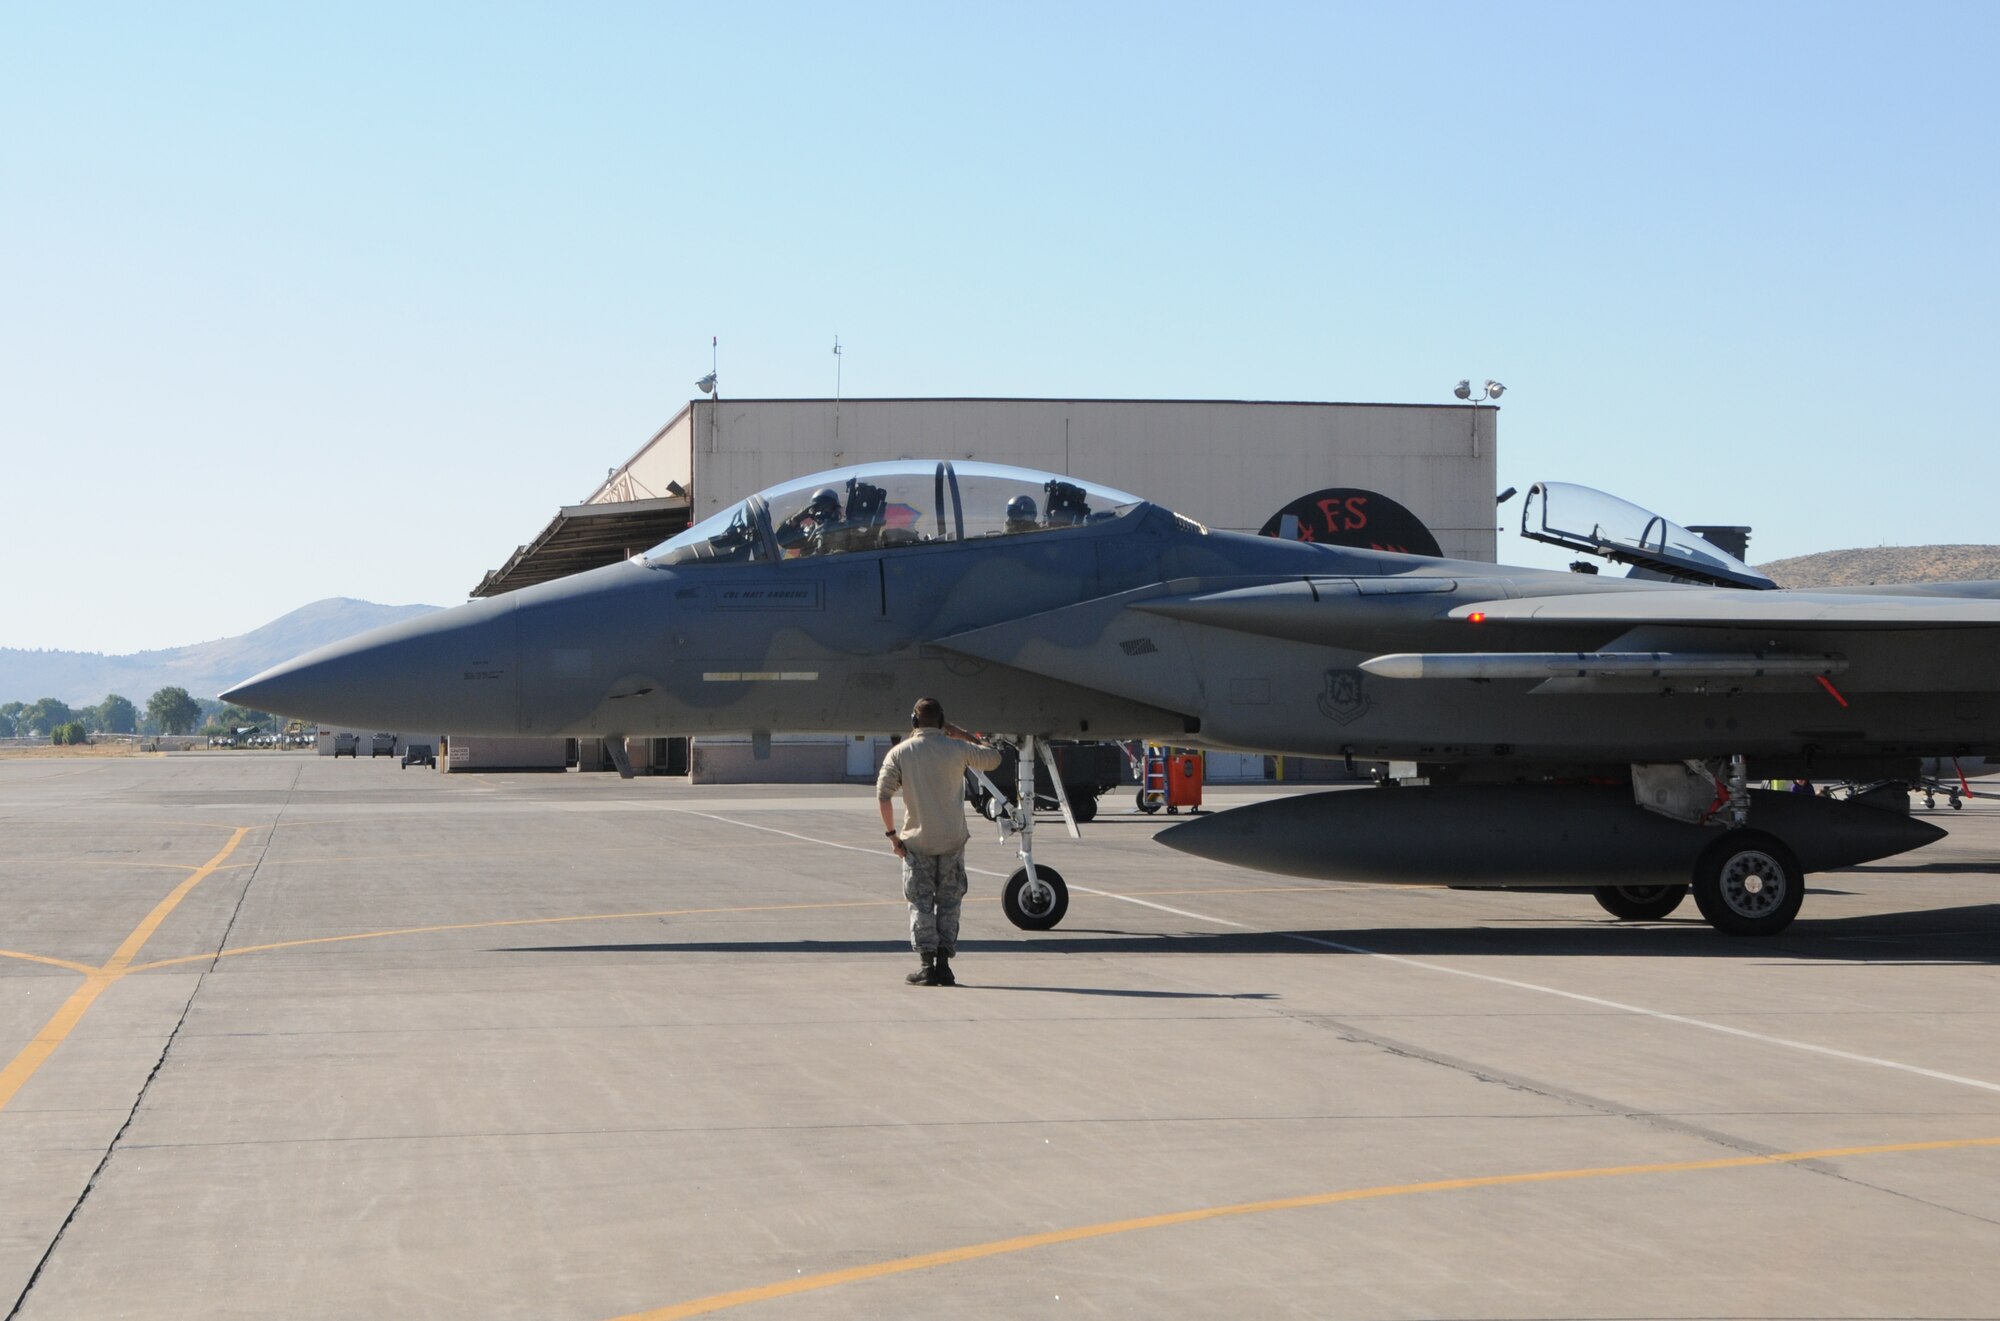 An F-15C from the 173rd Fighter Wing taxis out to the flight line with a  in preparation for a high speed  taxi ride arranged for spouses of maintenance group members, Oct. 4, 2015 at Kingsley Field, Ore. During the morning 20 spouses saw first-hand the result of their significant others’ work on a day-to-day basis. (U.S. Air National Guard photo by Tech. Sgt. Jefferson Thompson/released)